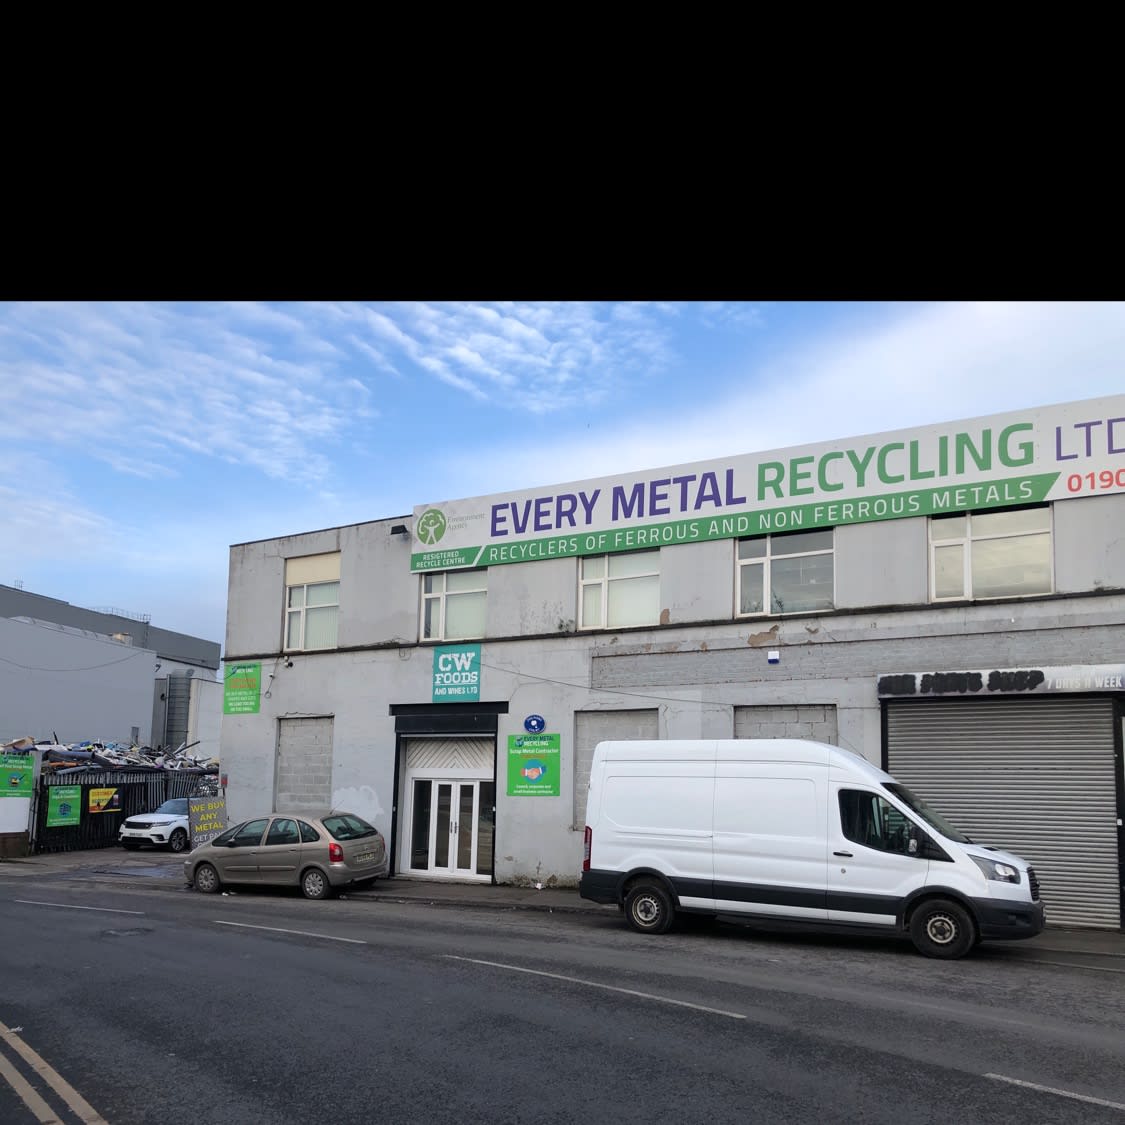 Images Every Metal Recycling Ltd